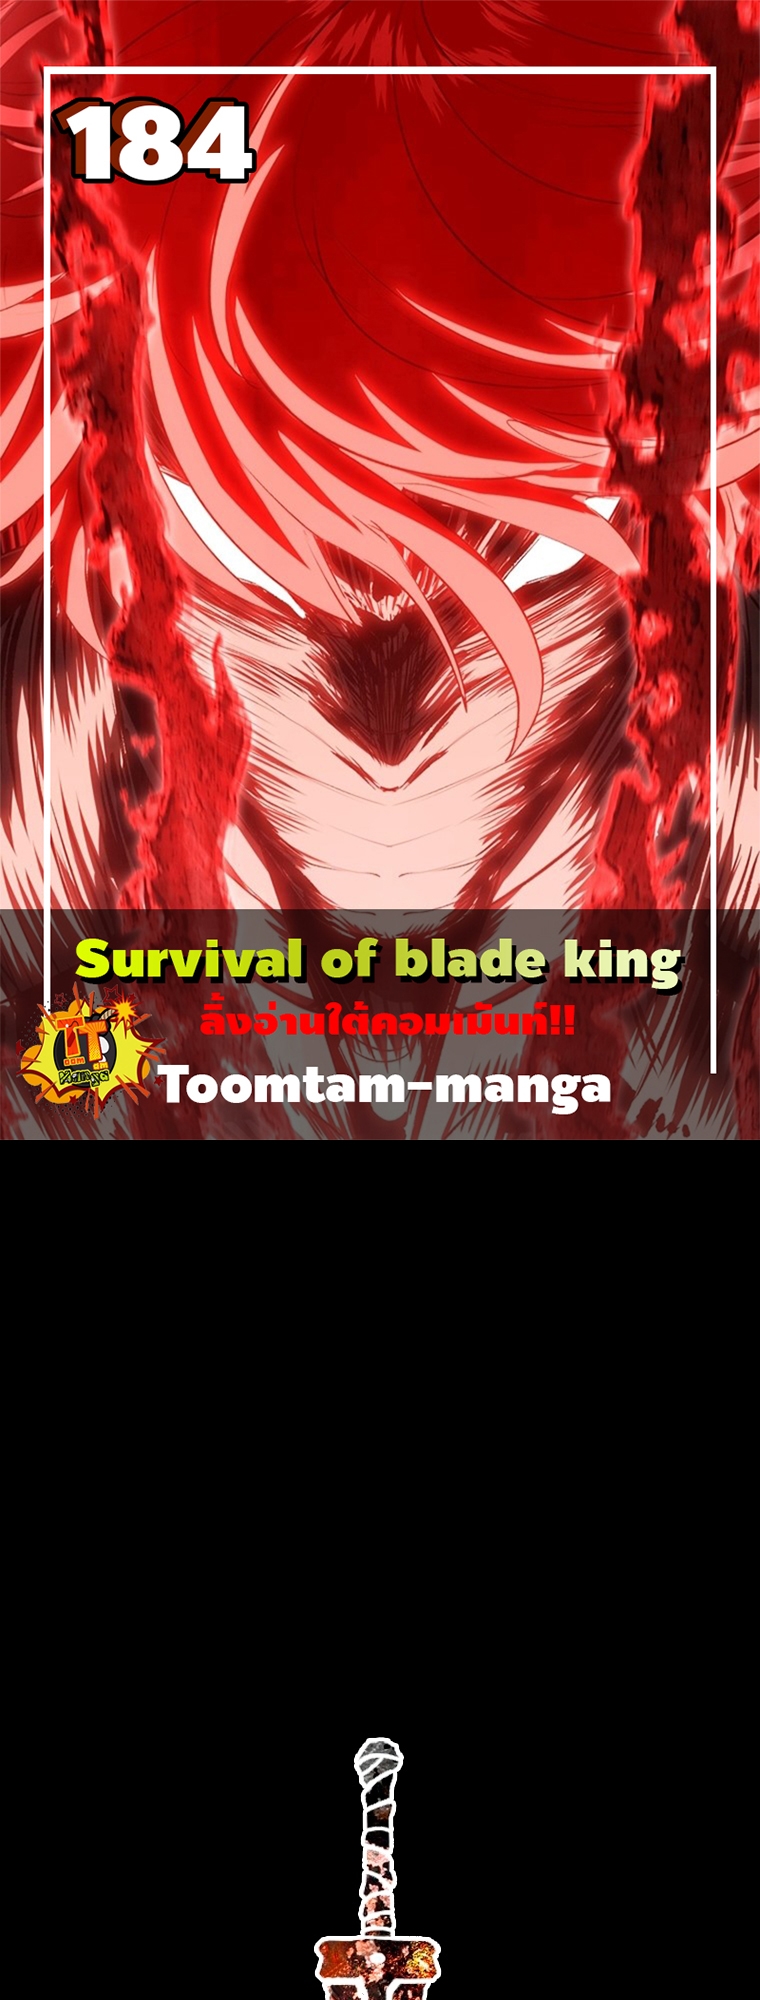 Survival of blade king 184 23 09 660001